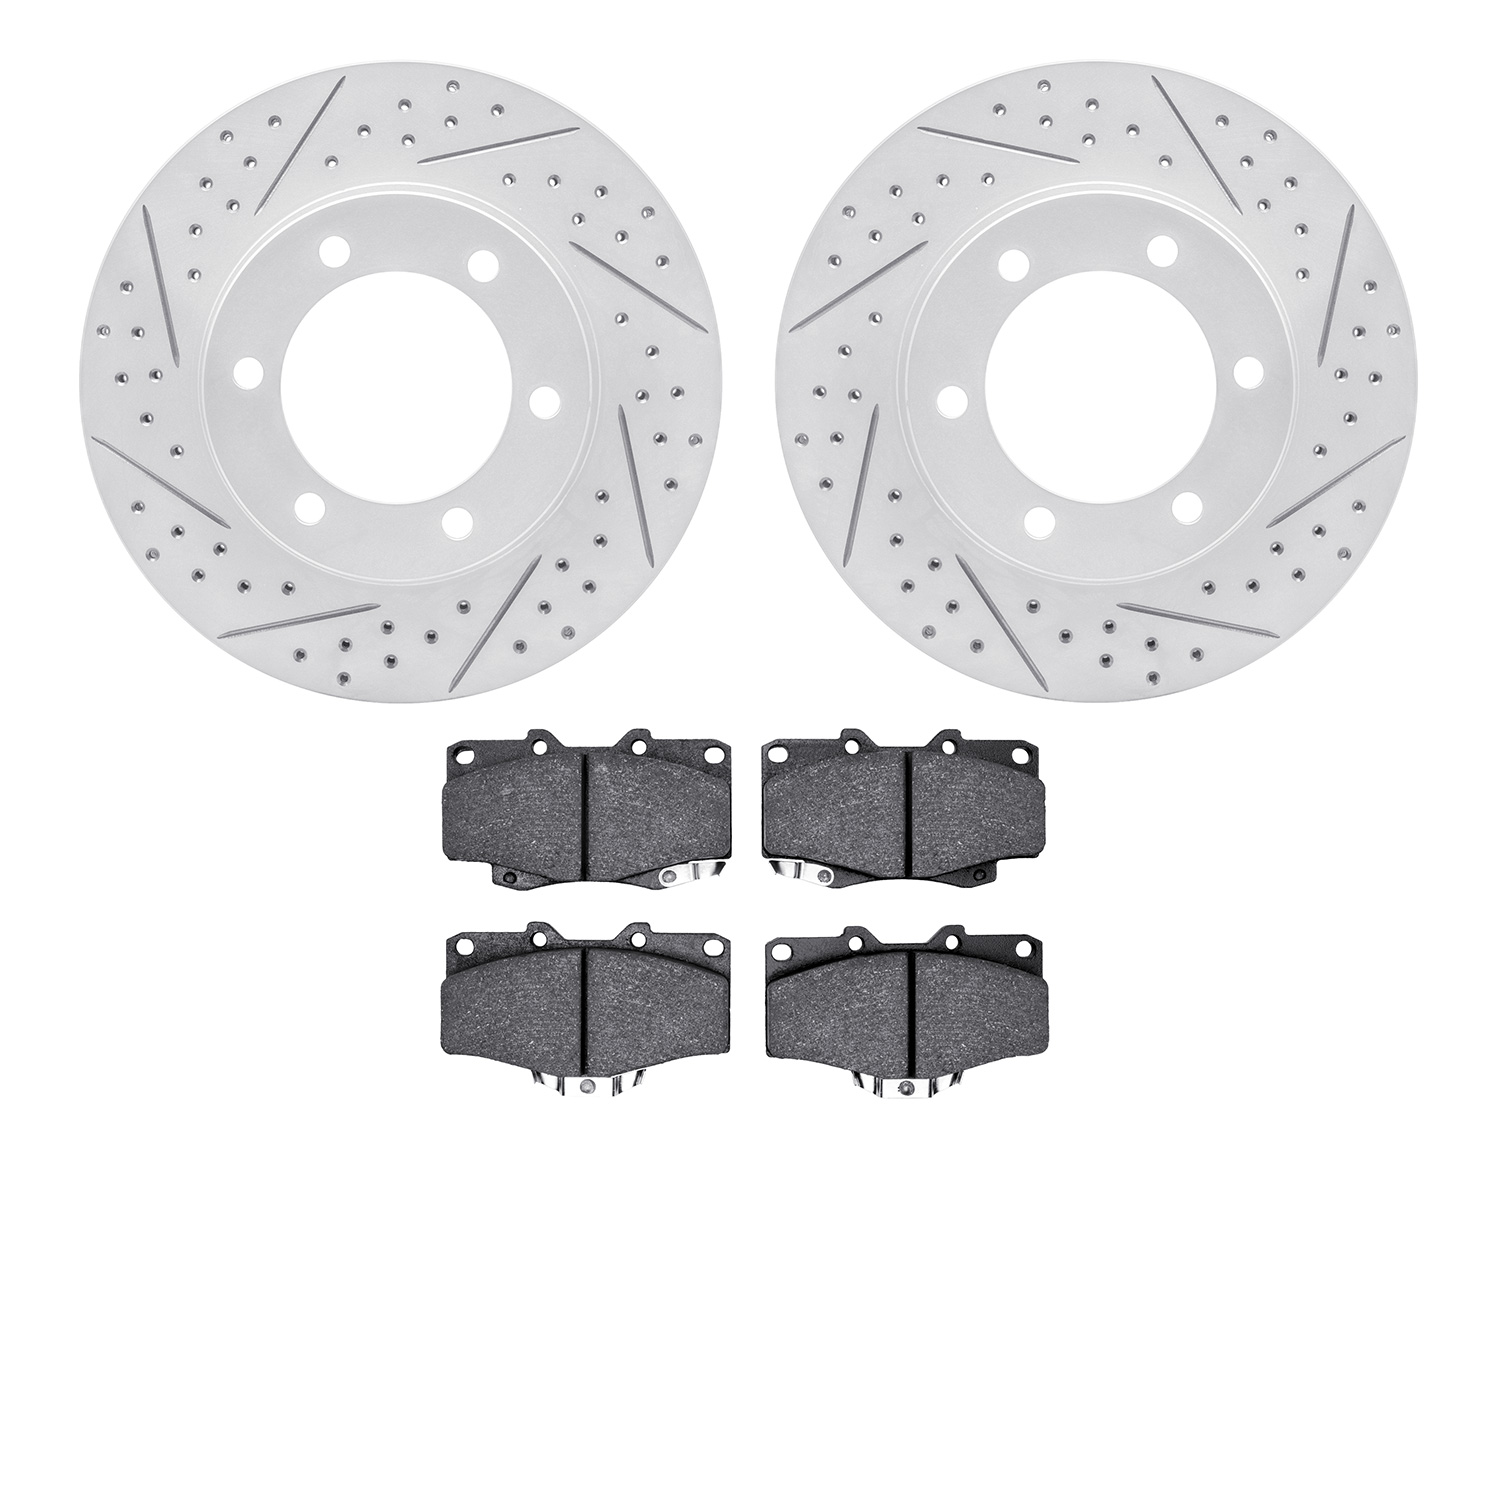 2502-76077 Geoperformance Drilled/Slotted Rotors w/5000 Advanced Brake Pads Kit, 1995-2004 Lexus/Toyota/Scion, Position: Front